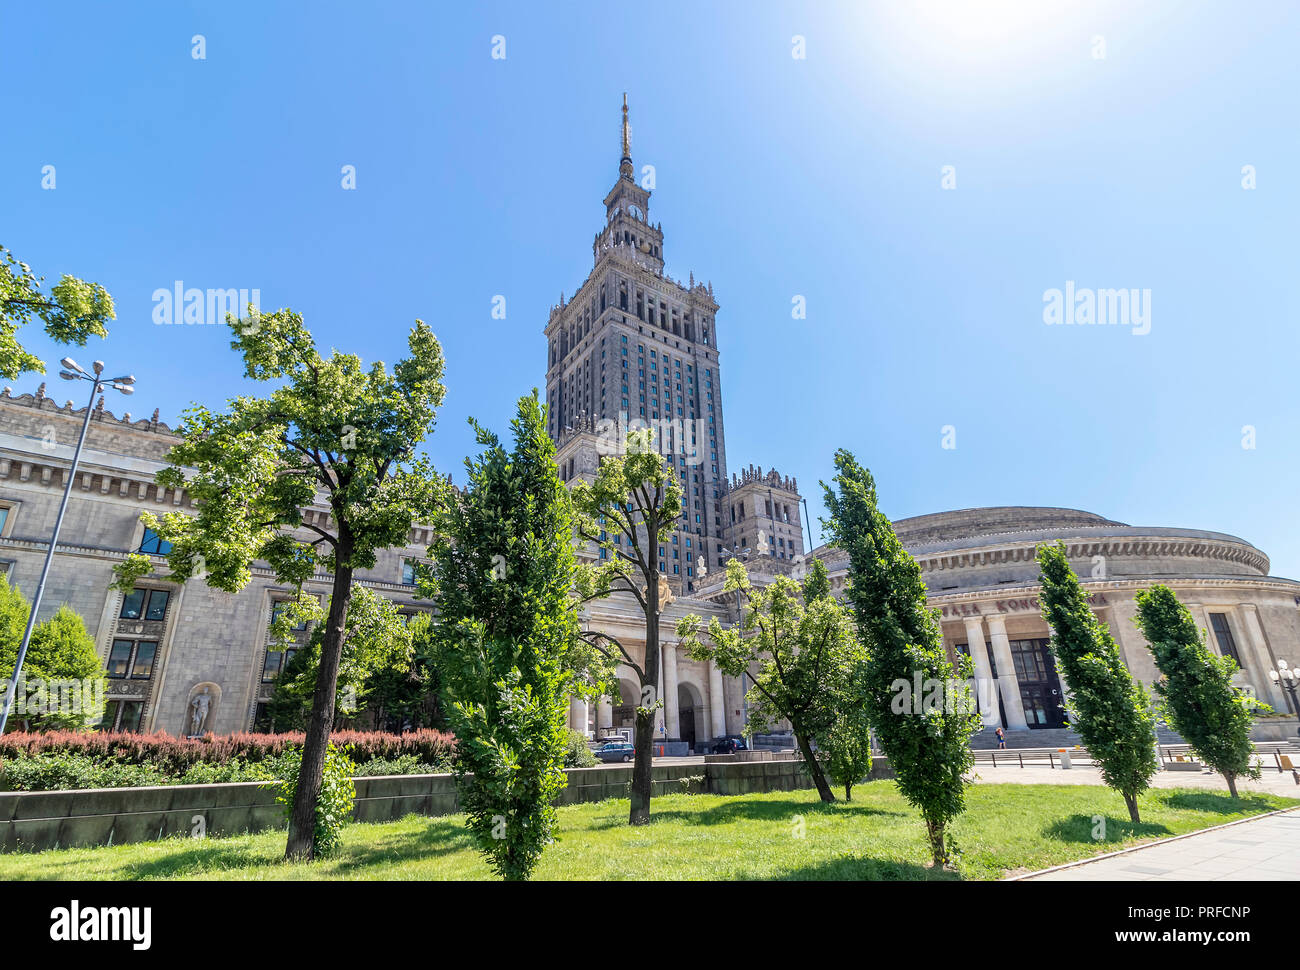 Soviet style building in Warsaw, Poland Stock Photo